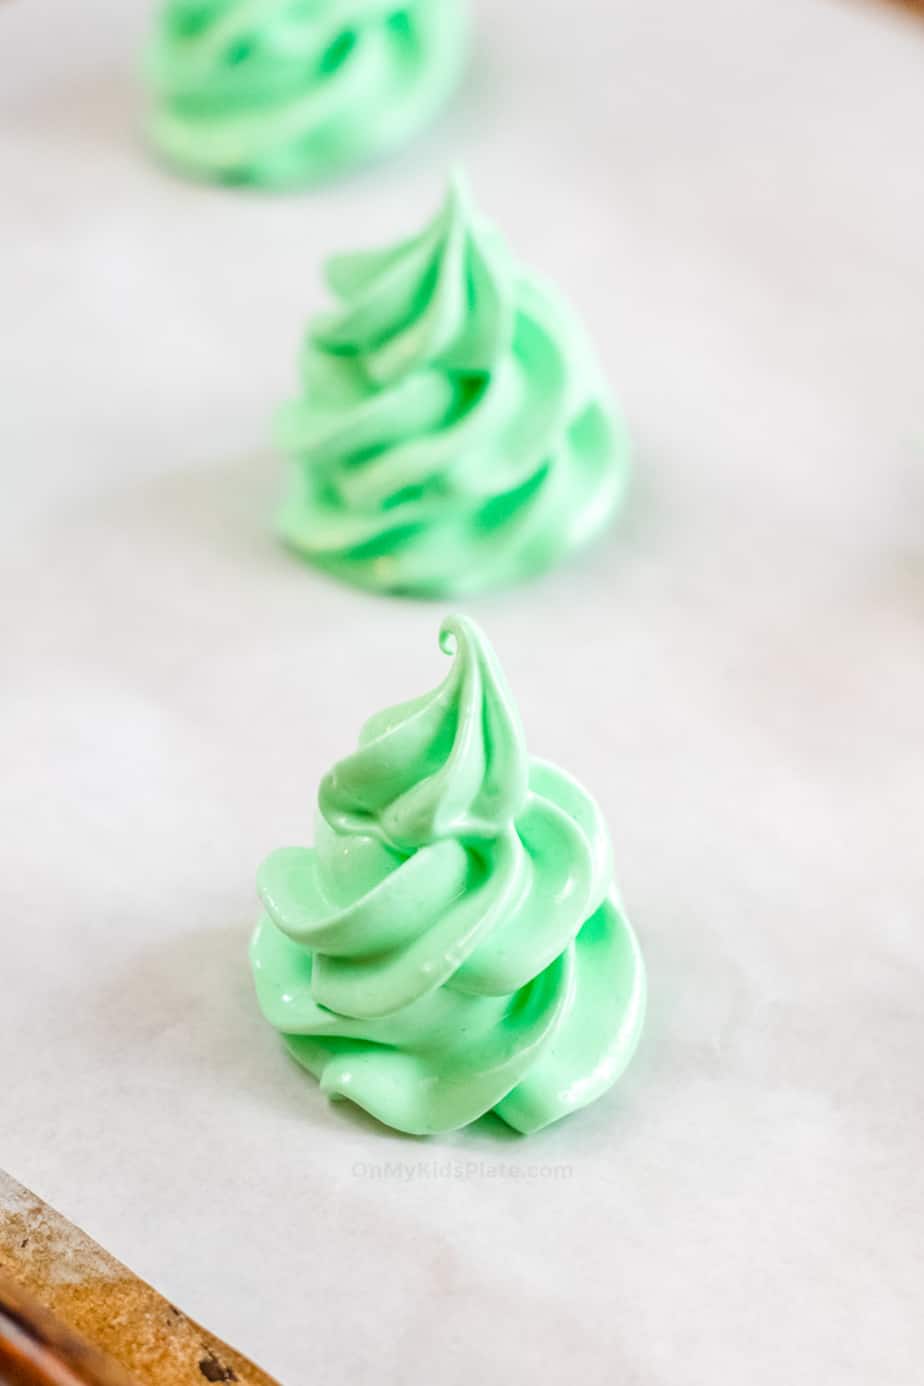 Green meringue piped into a christmas tree shape on a parchment lined baking sheet from the side